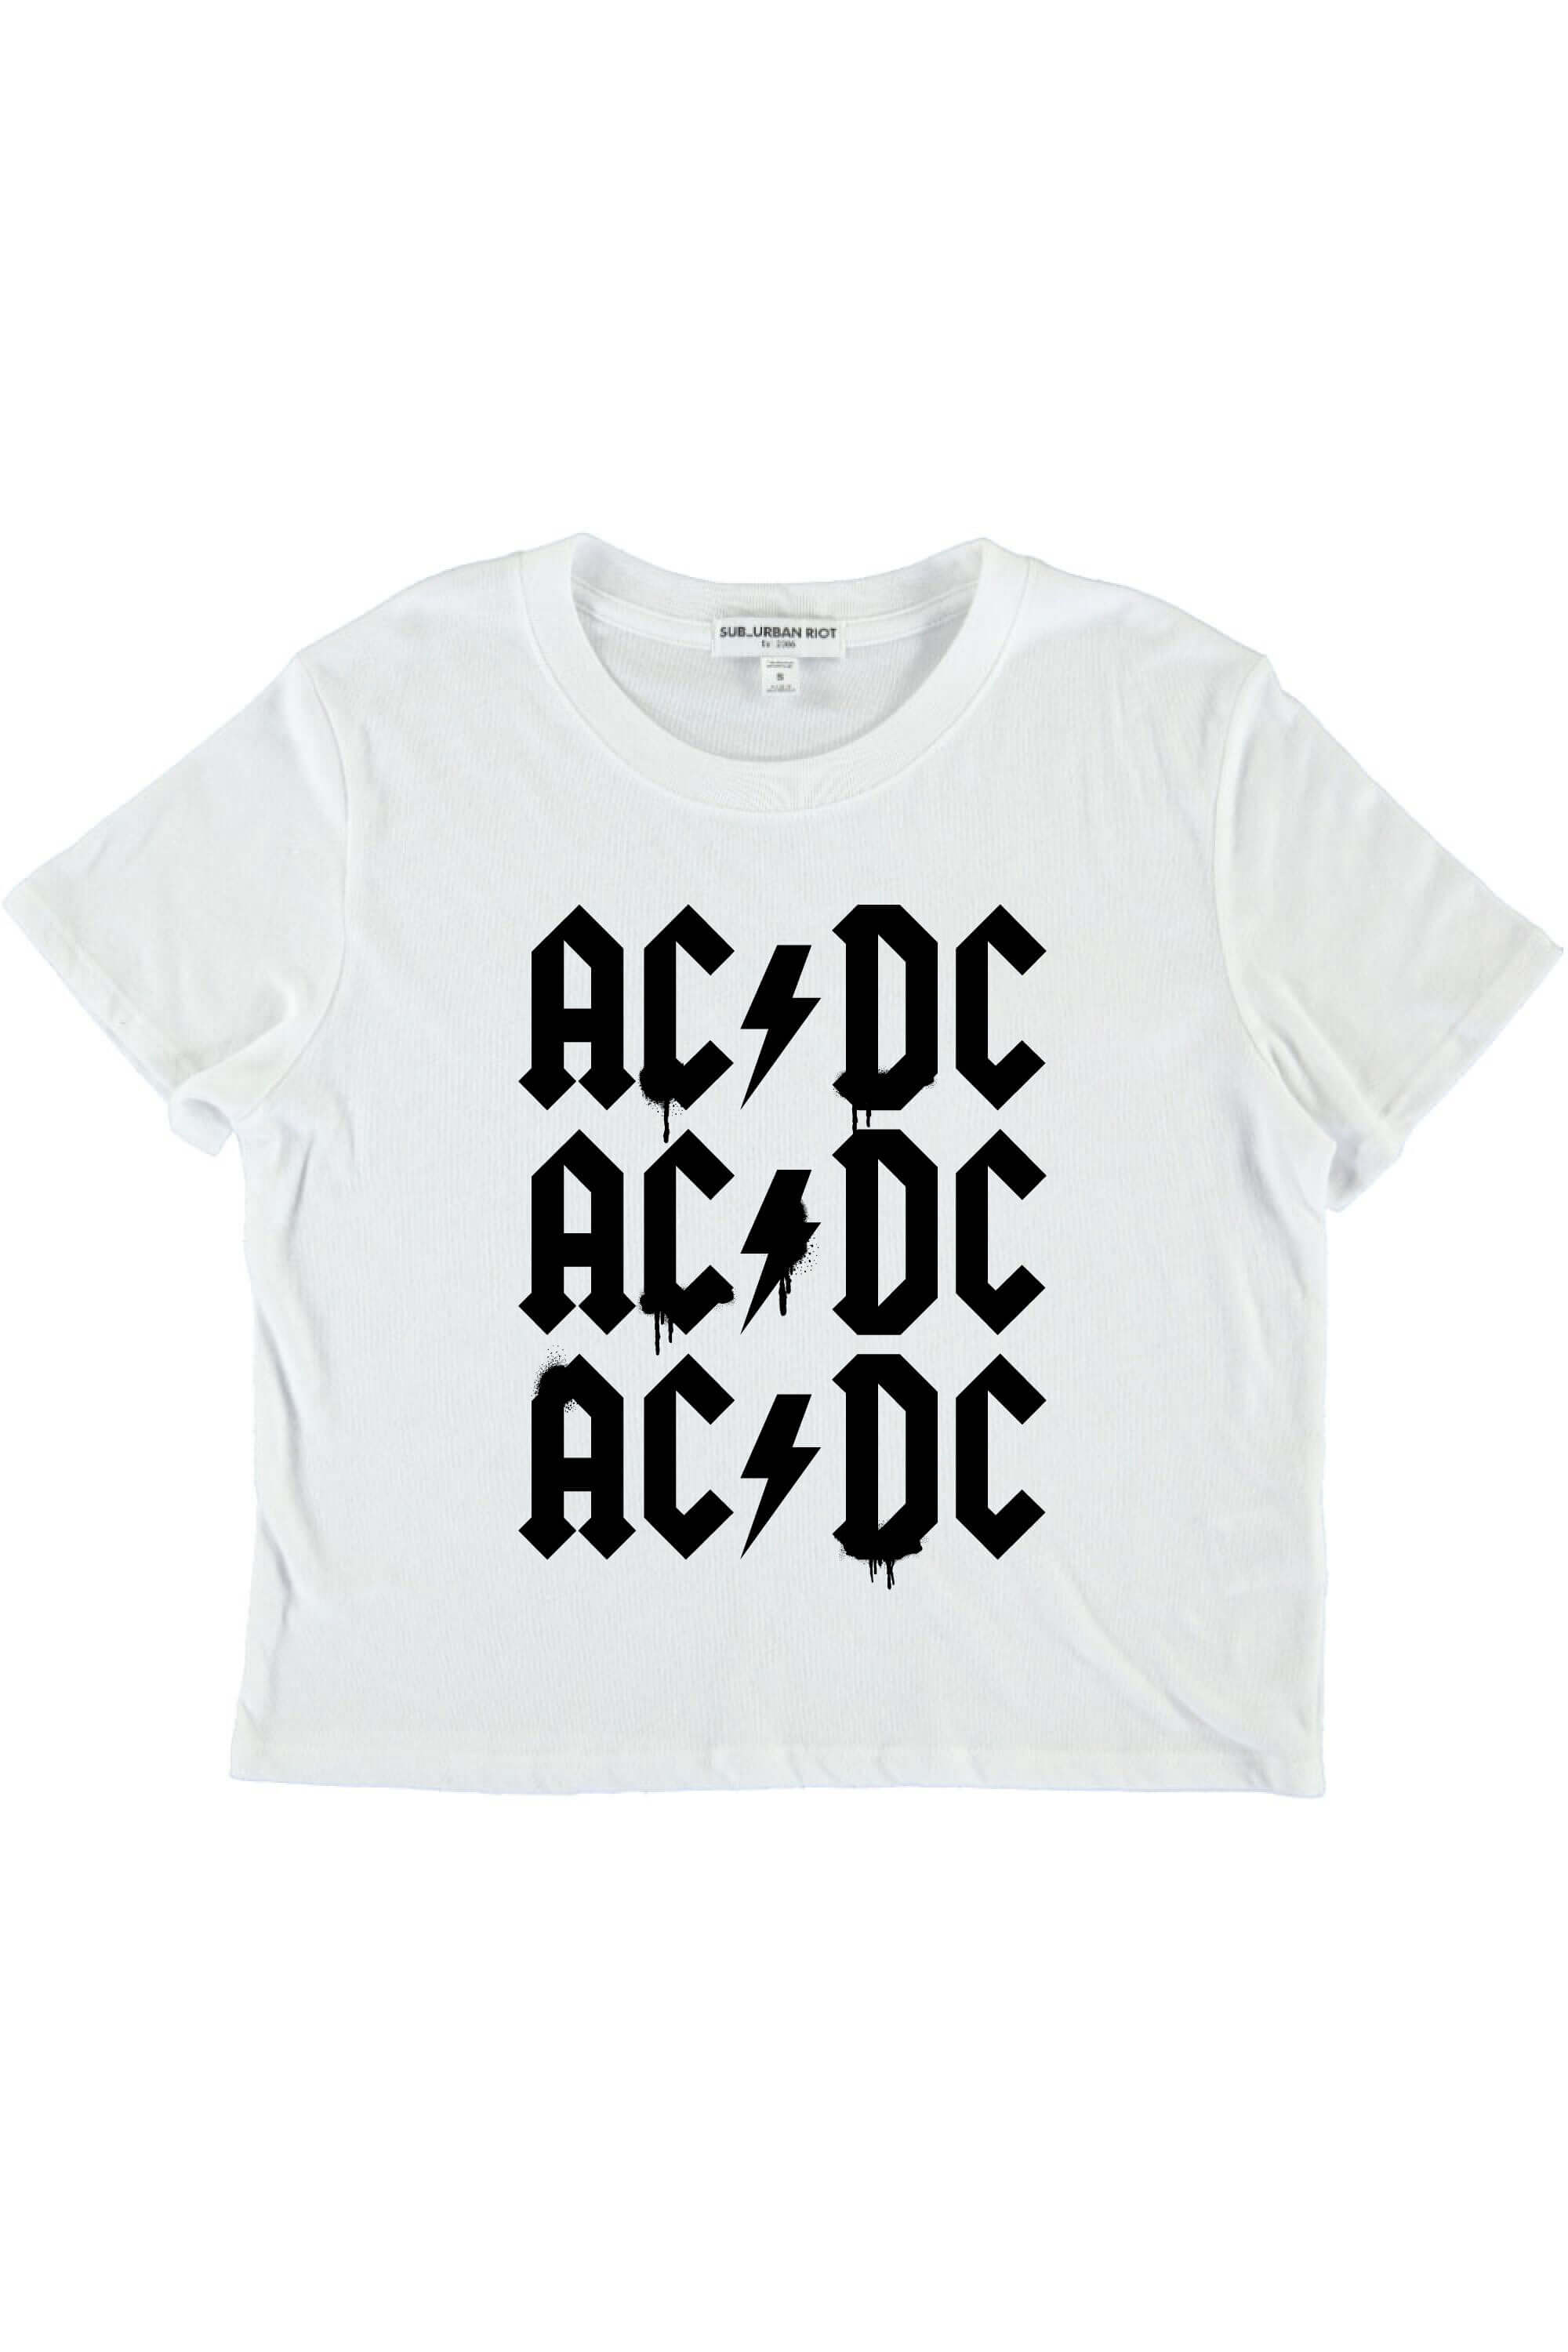 ACDC SPRAY YOUTH SIZE CROP TEE